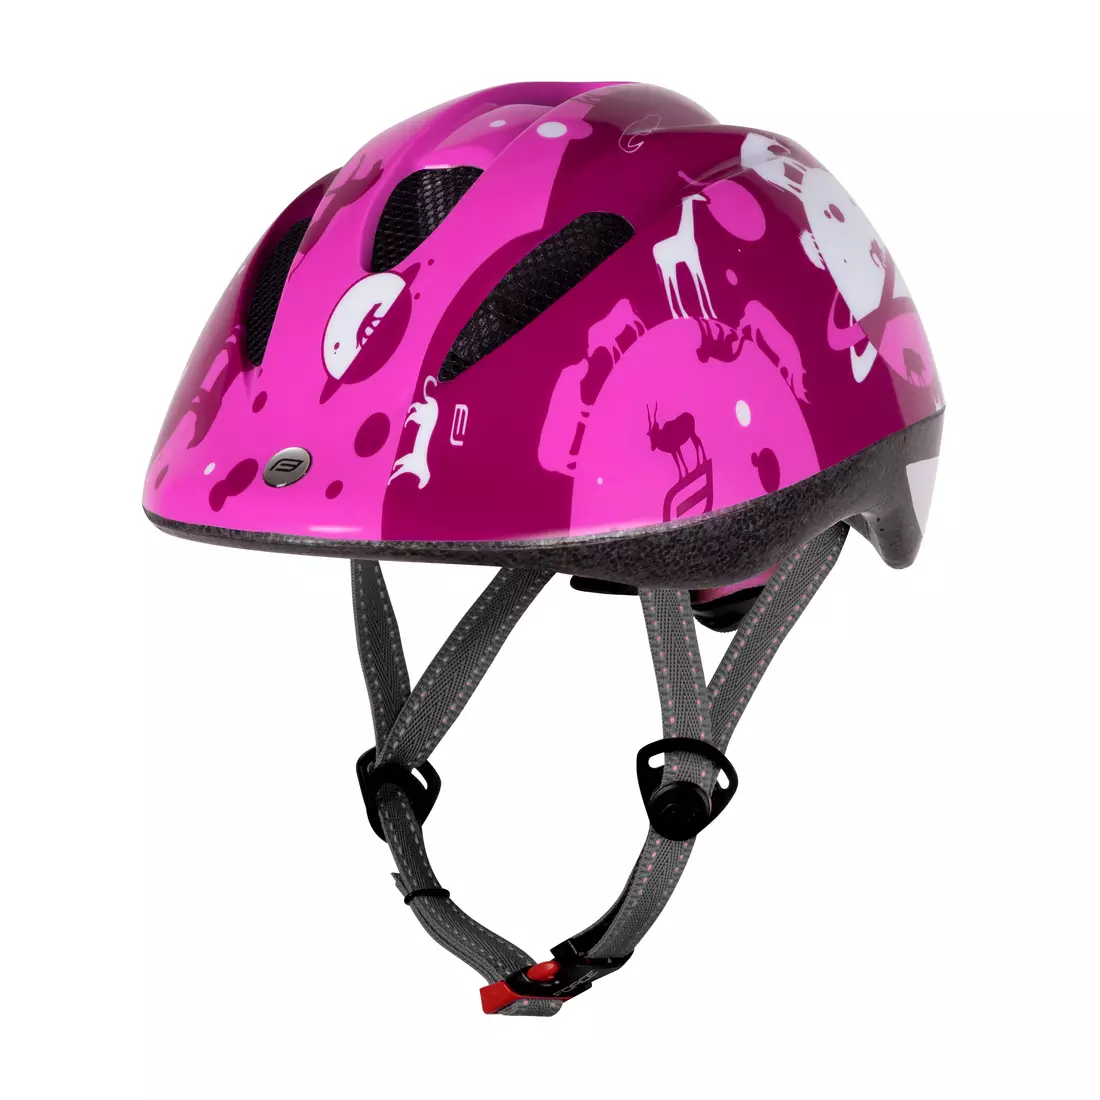 FORCE Children's bicycle helmet FUN PLANETS, pink and white 9022412